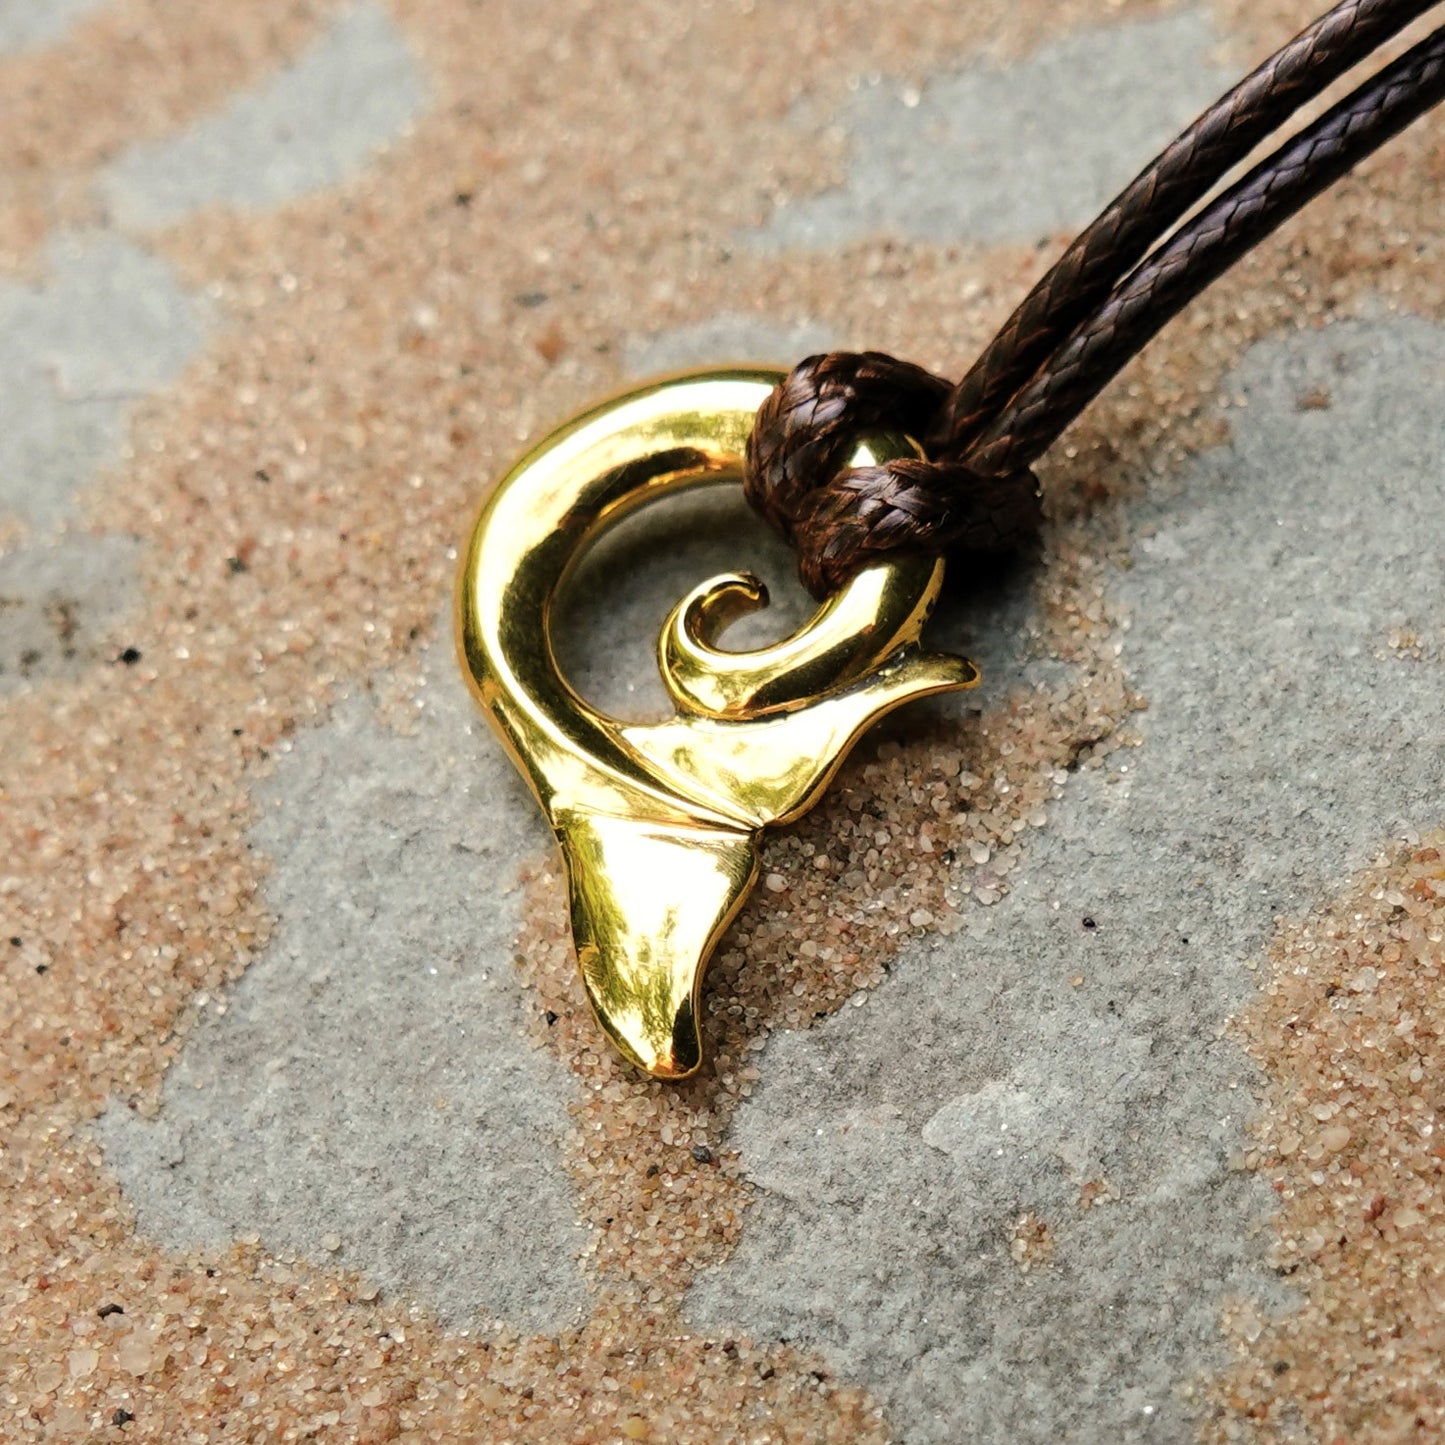 Whale tail necklace. Solid precious metal whale fluke design, available in yellow gold, white gold or platinum. This piece will be handmade for you.